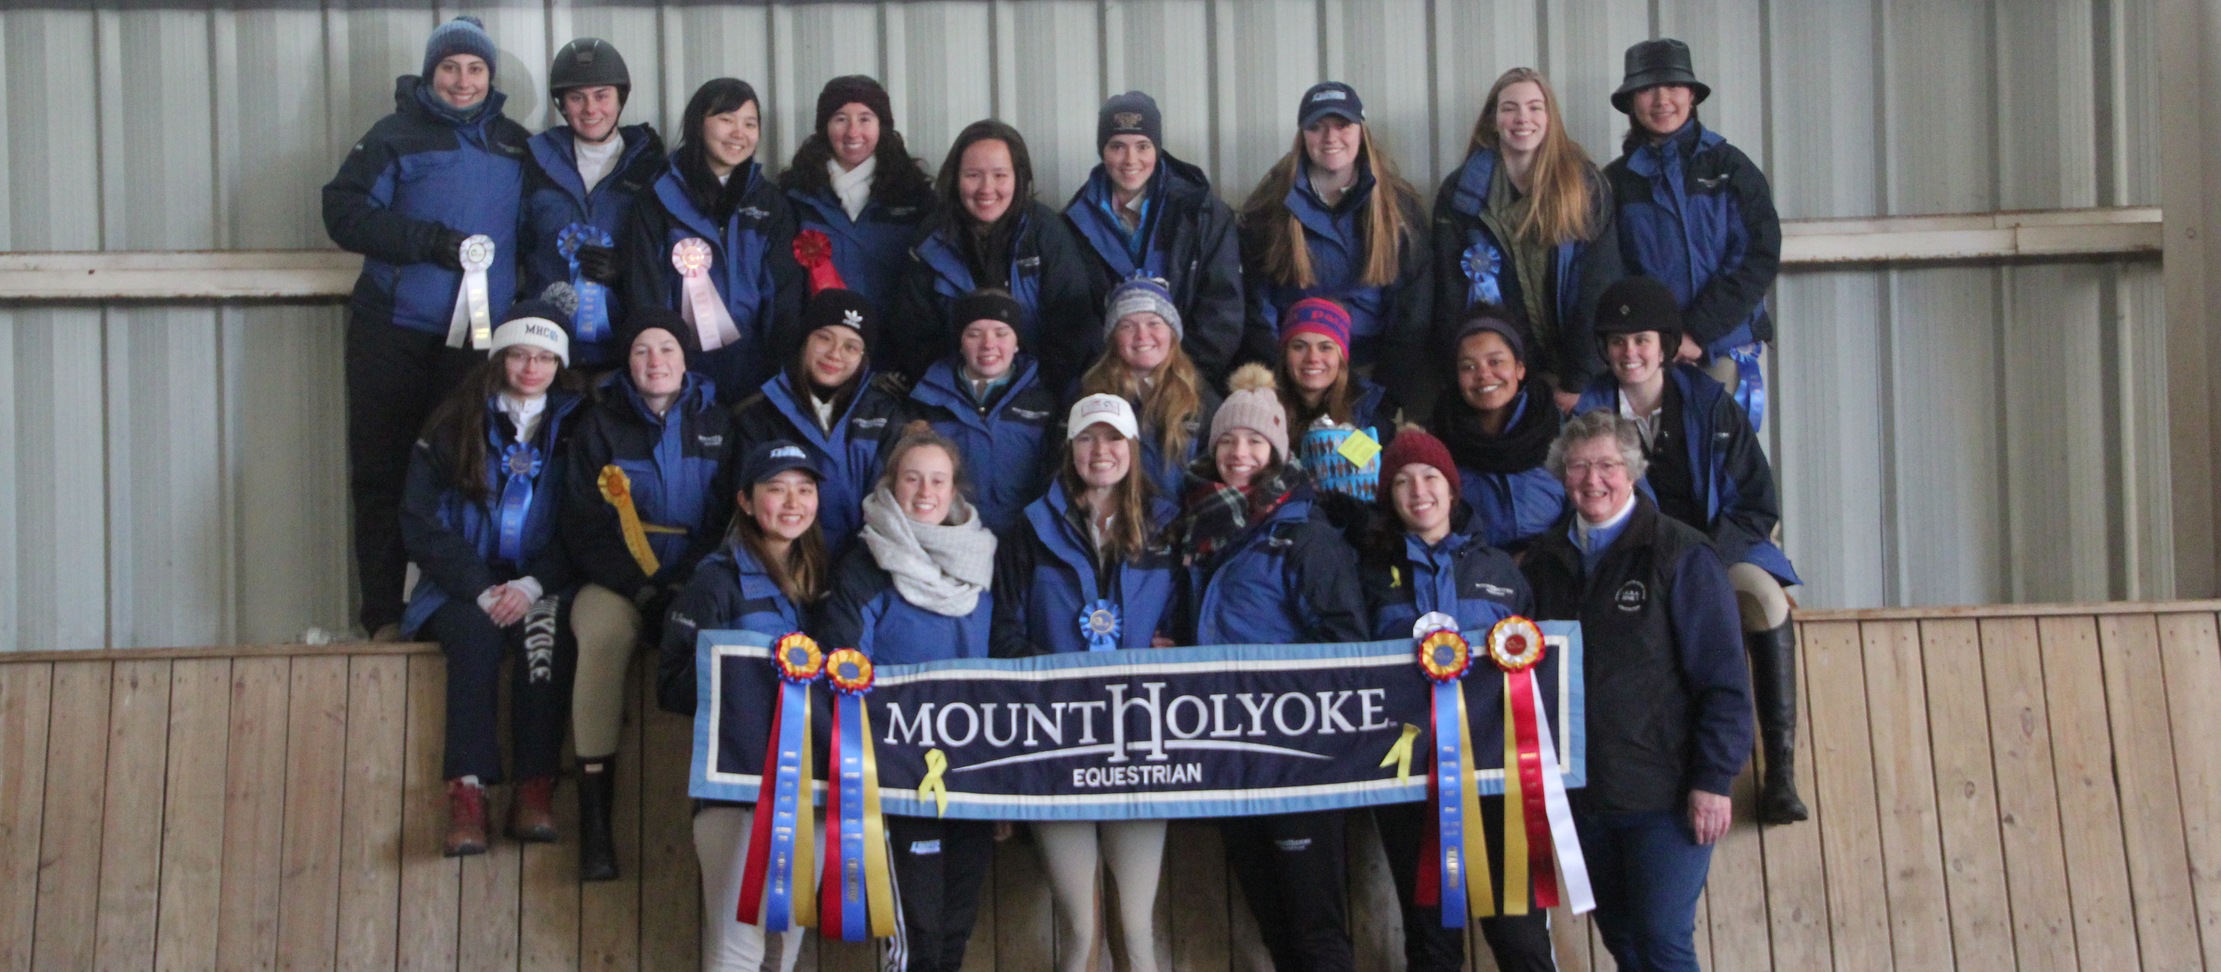 Riding Collects Second-Straight High Point Champion Title at UMass Amherst Show